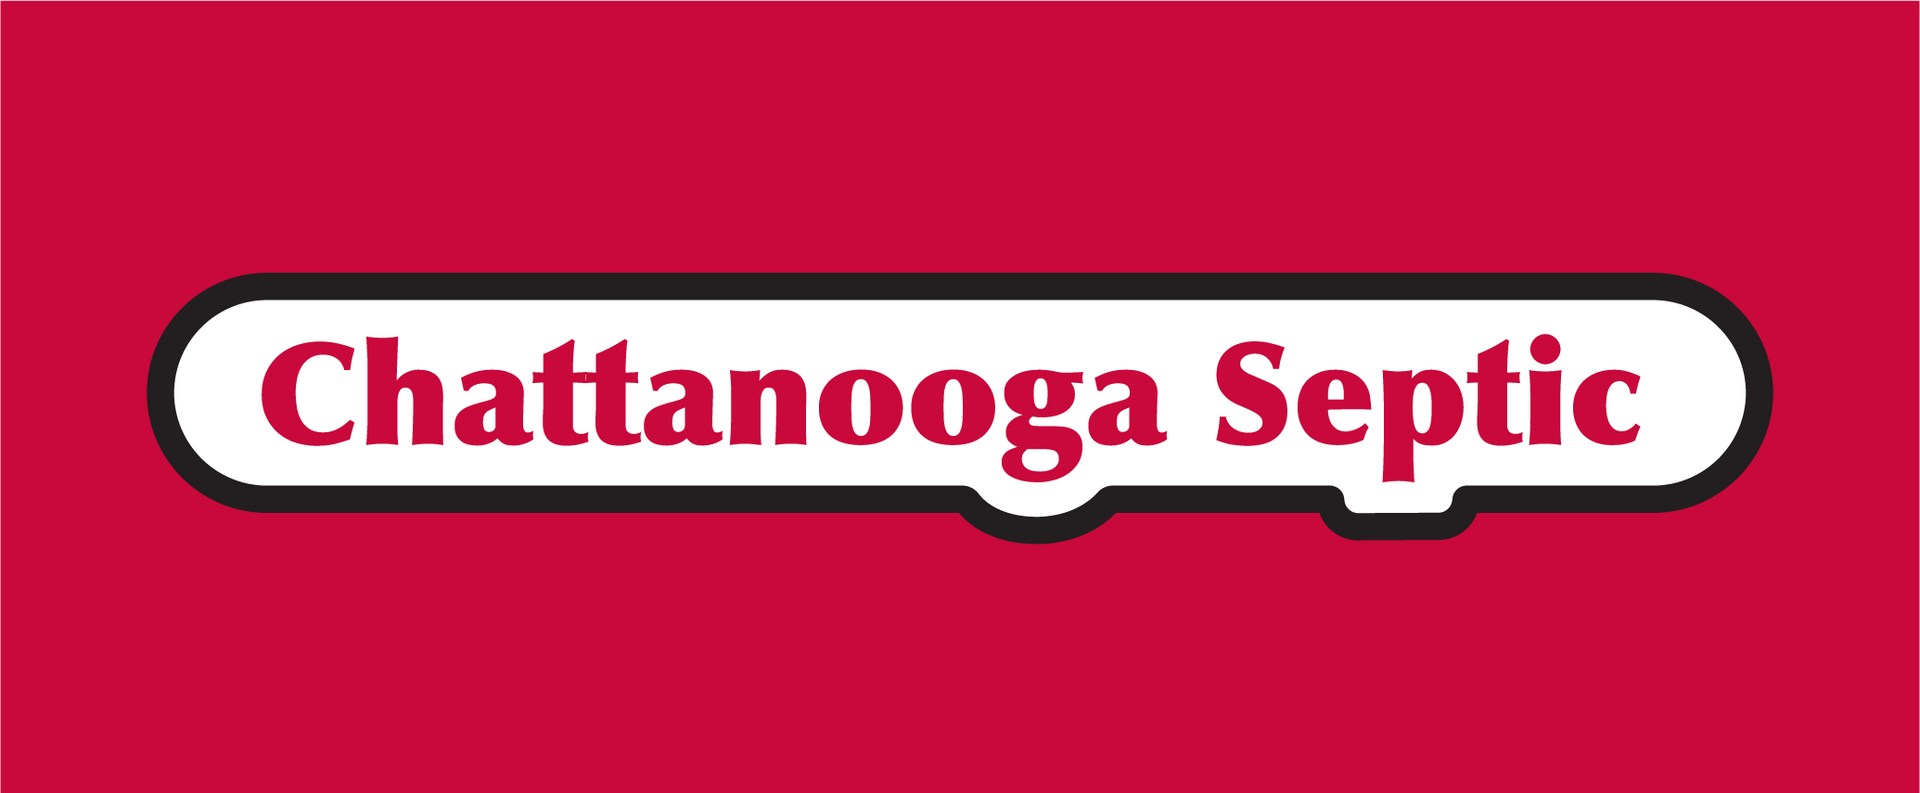 image of the chattanooga septic logo on a red background